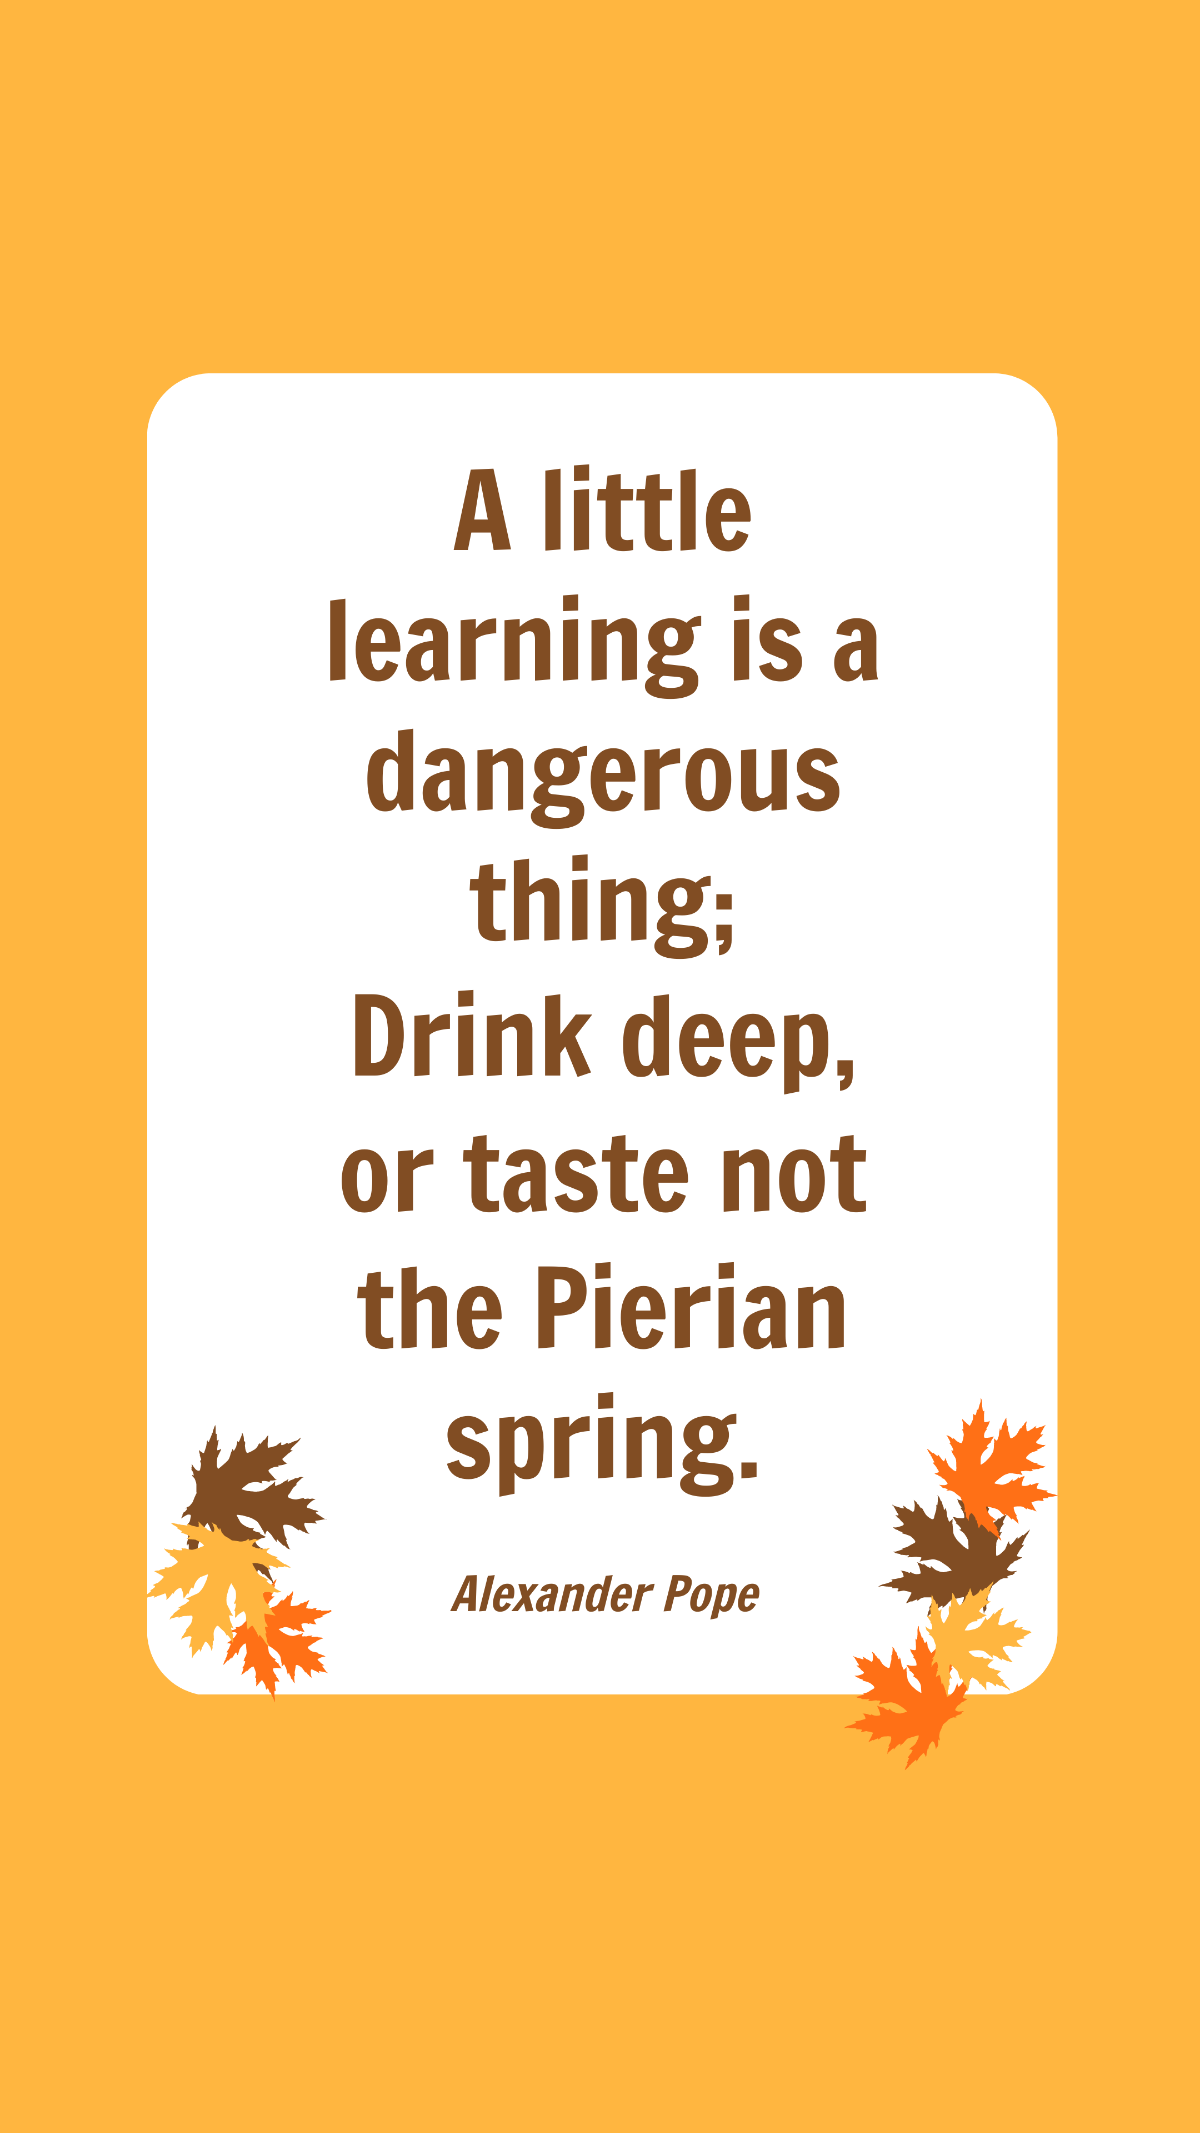 Free Alexander Pope - A little learning is a dangerous thing; Drink deep, or taste not the Pierian spring. Template